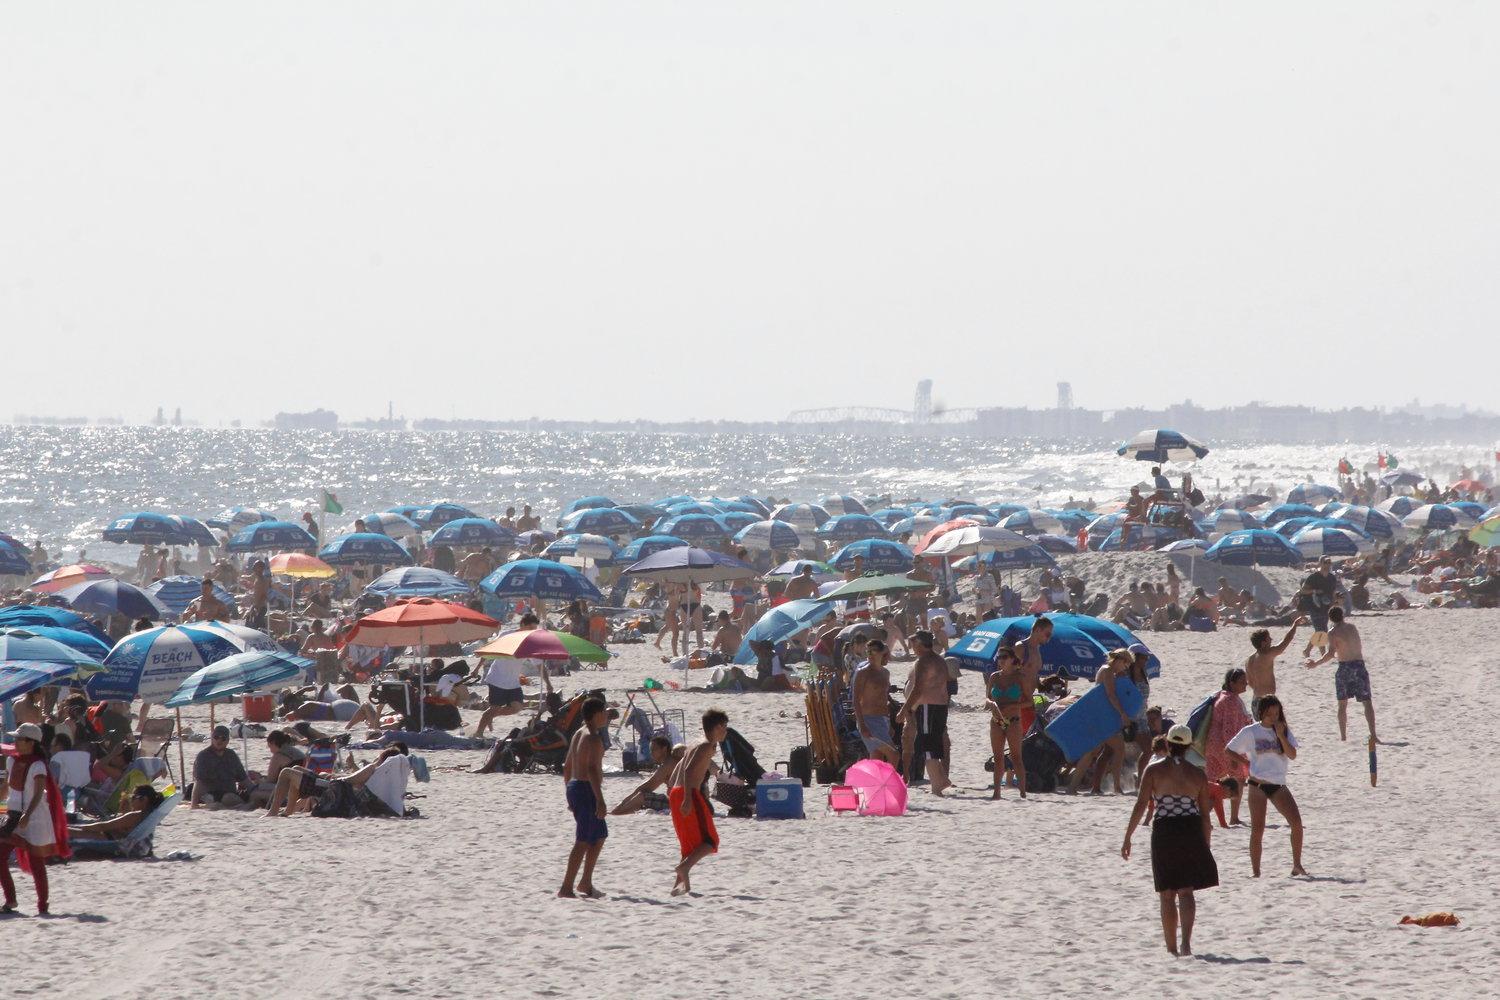 Long Beach officials are expecting large crowds at the shorefront this summer after tight covid restrictions in 2020.